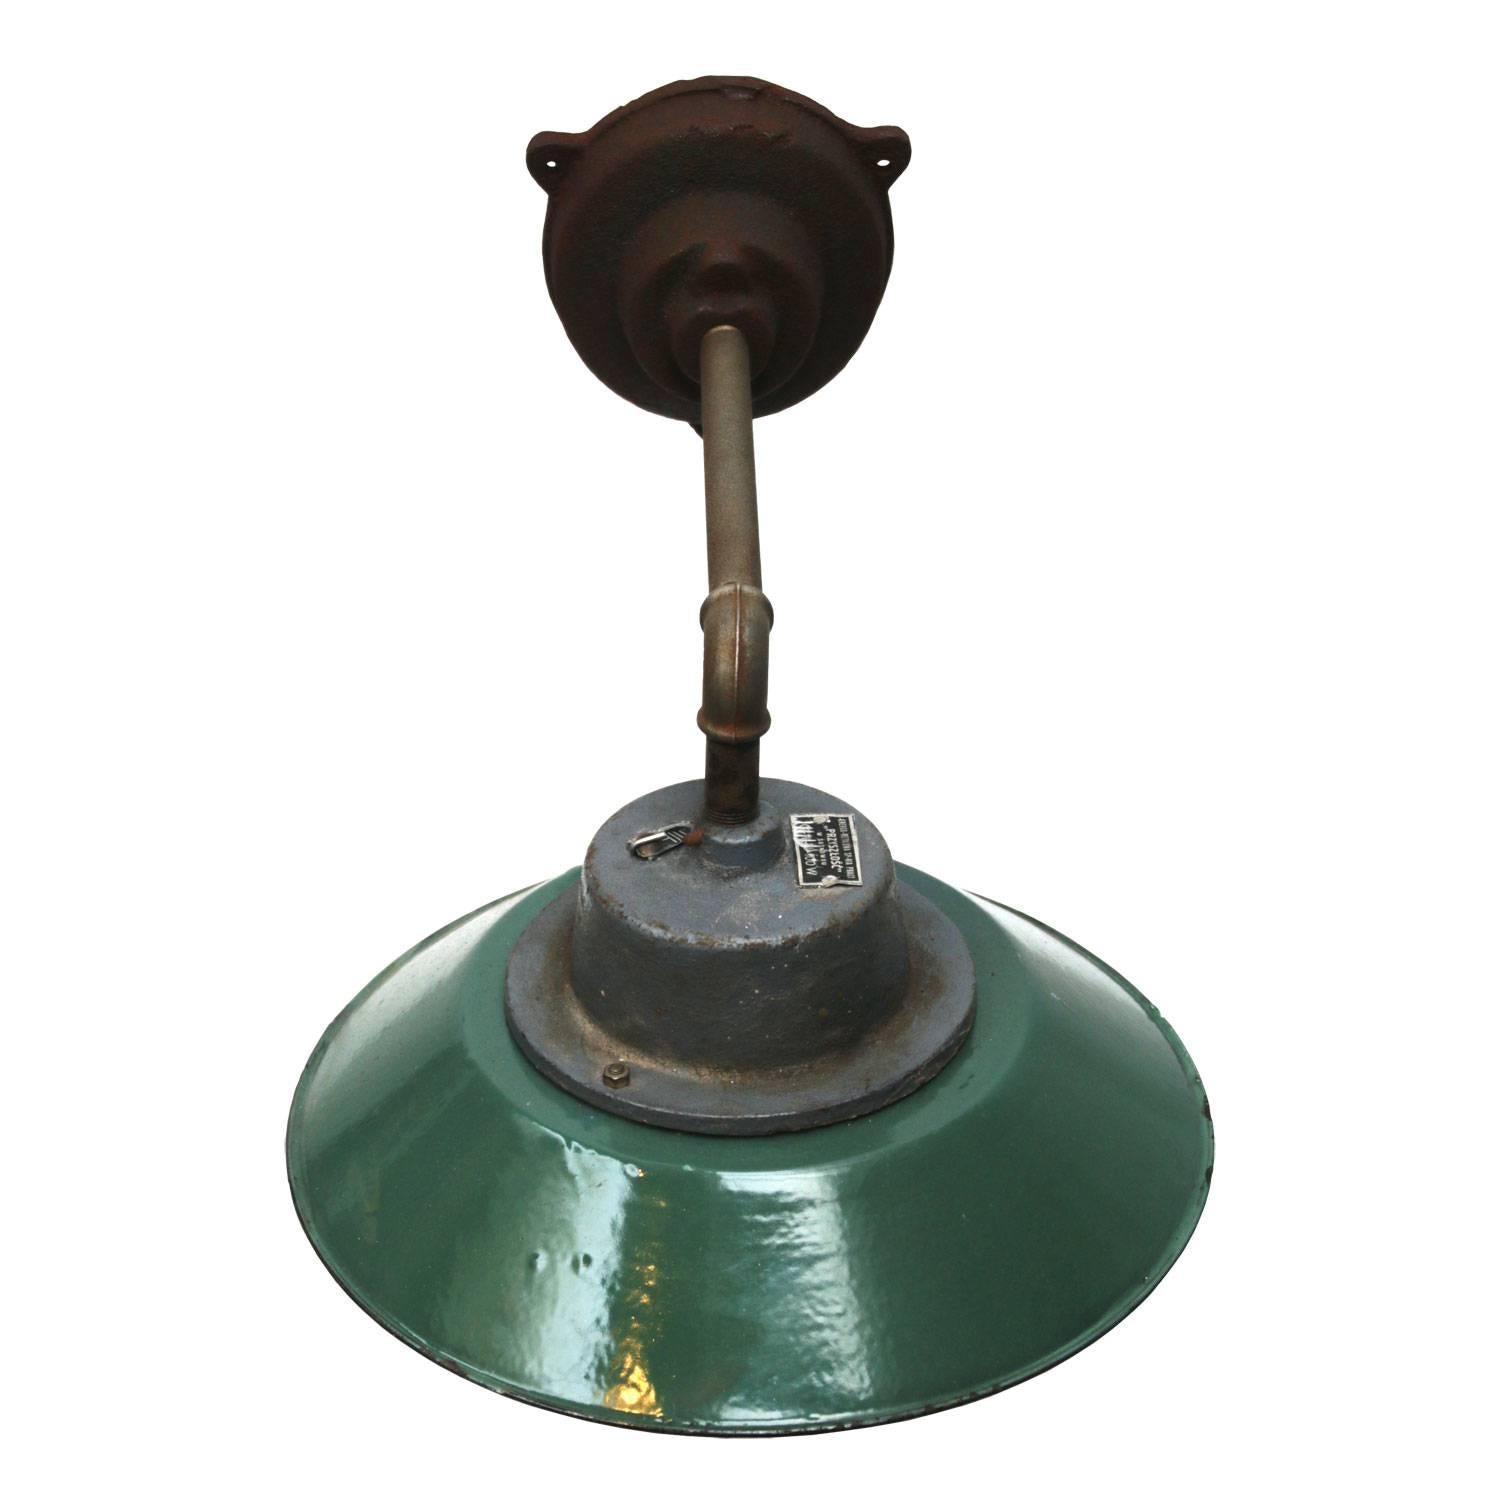 Petrol colored enamel industrial wall light with white interior. Clear glass.
Diameter cast iron wall mount: 12 cm, three holes to secure,

Weight: 5.5 kg / 12.1 lb

For use outdoors as well as indoors. 

All lamps have been made suitable by